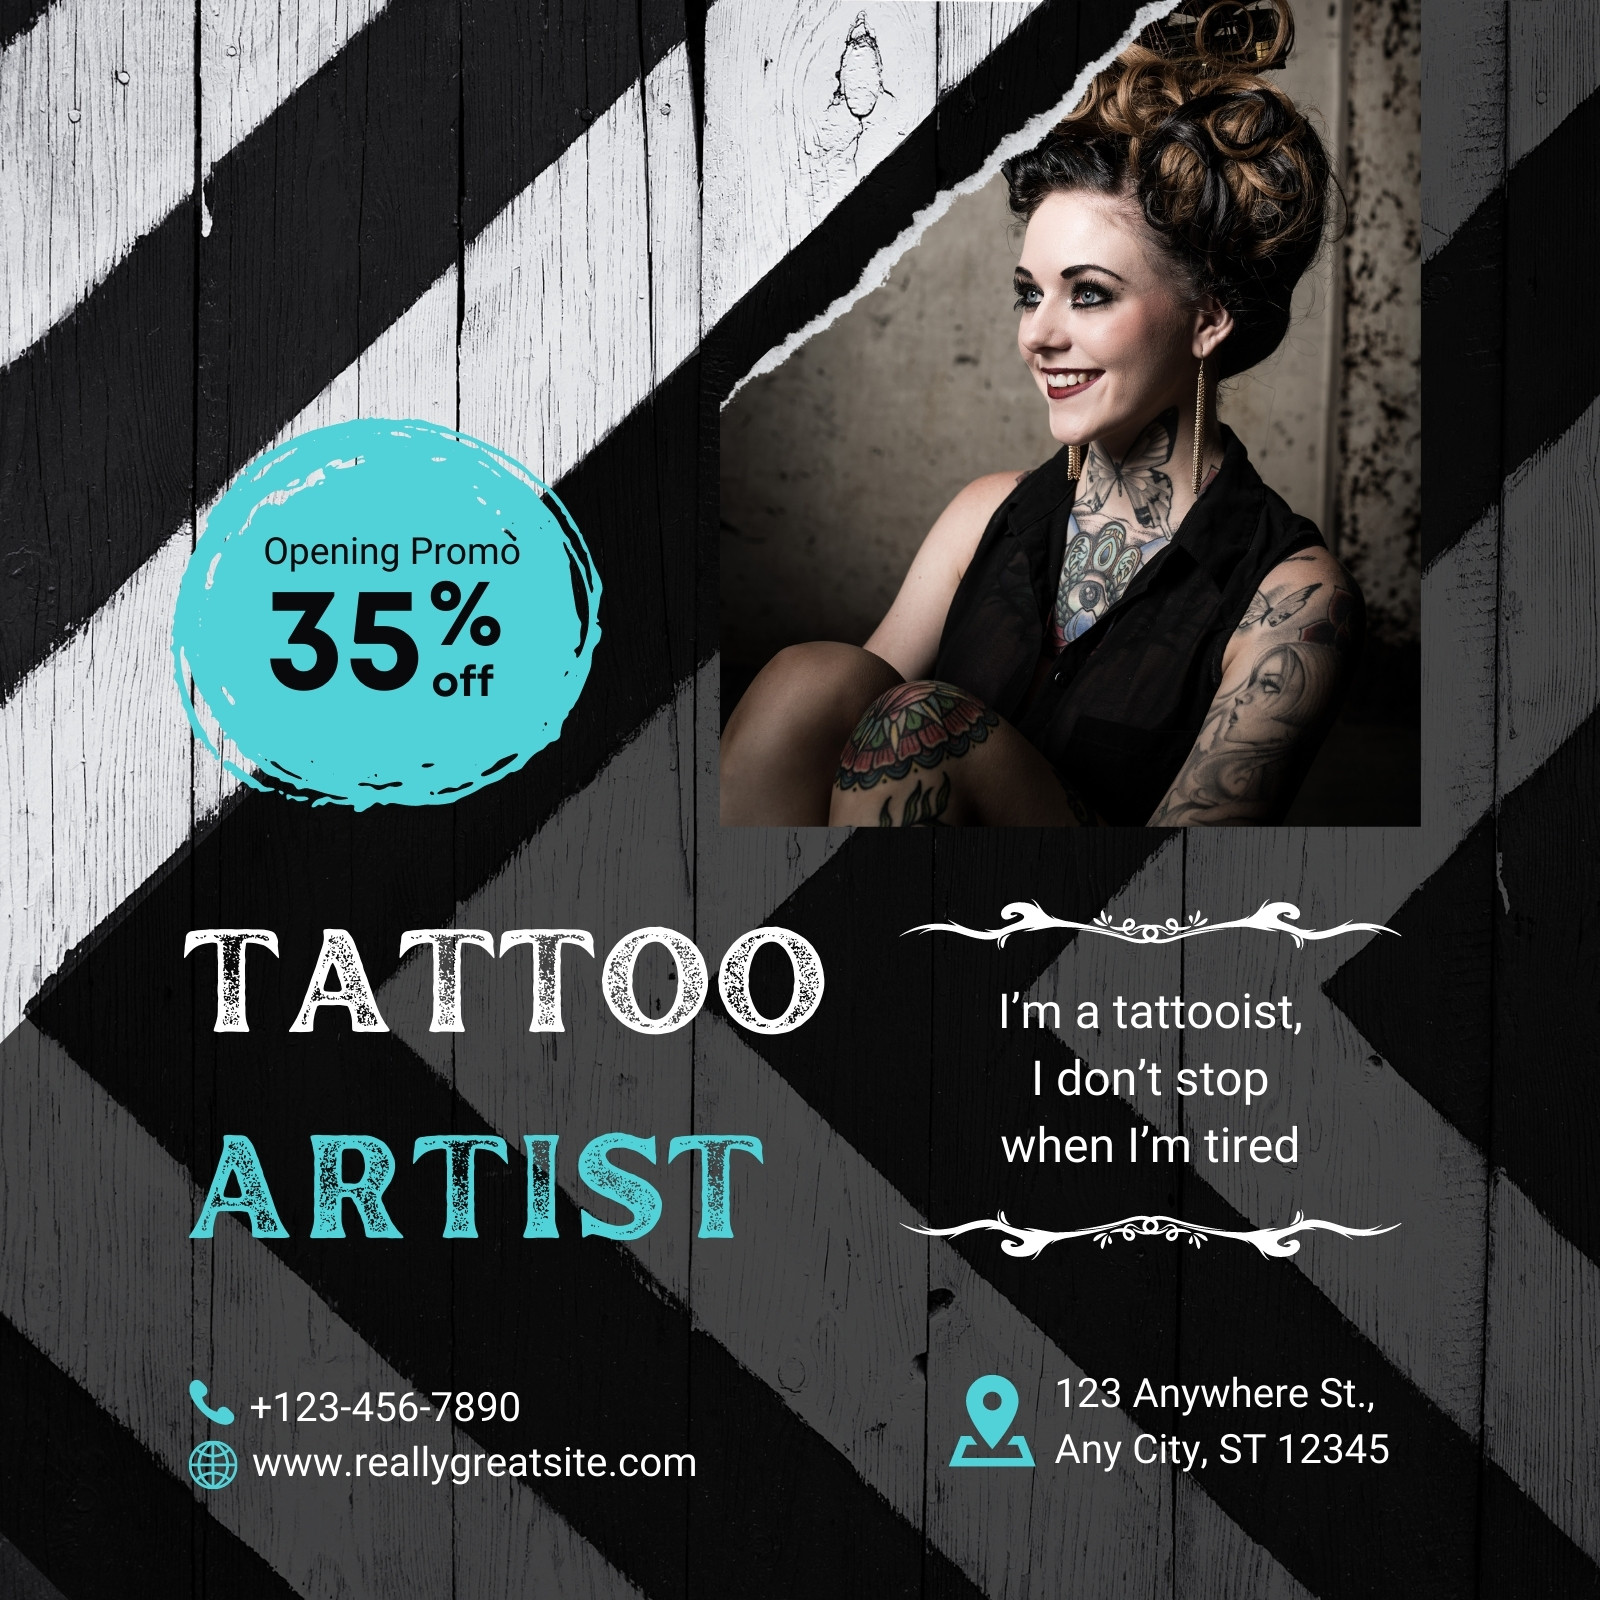 Tattoo Studio Rollup Banner Template in Word, Publisher, Google Docs, Pages  - Download | Template.net